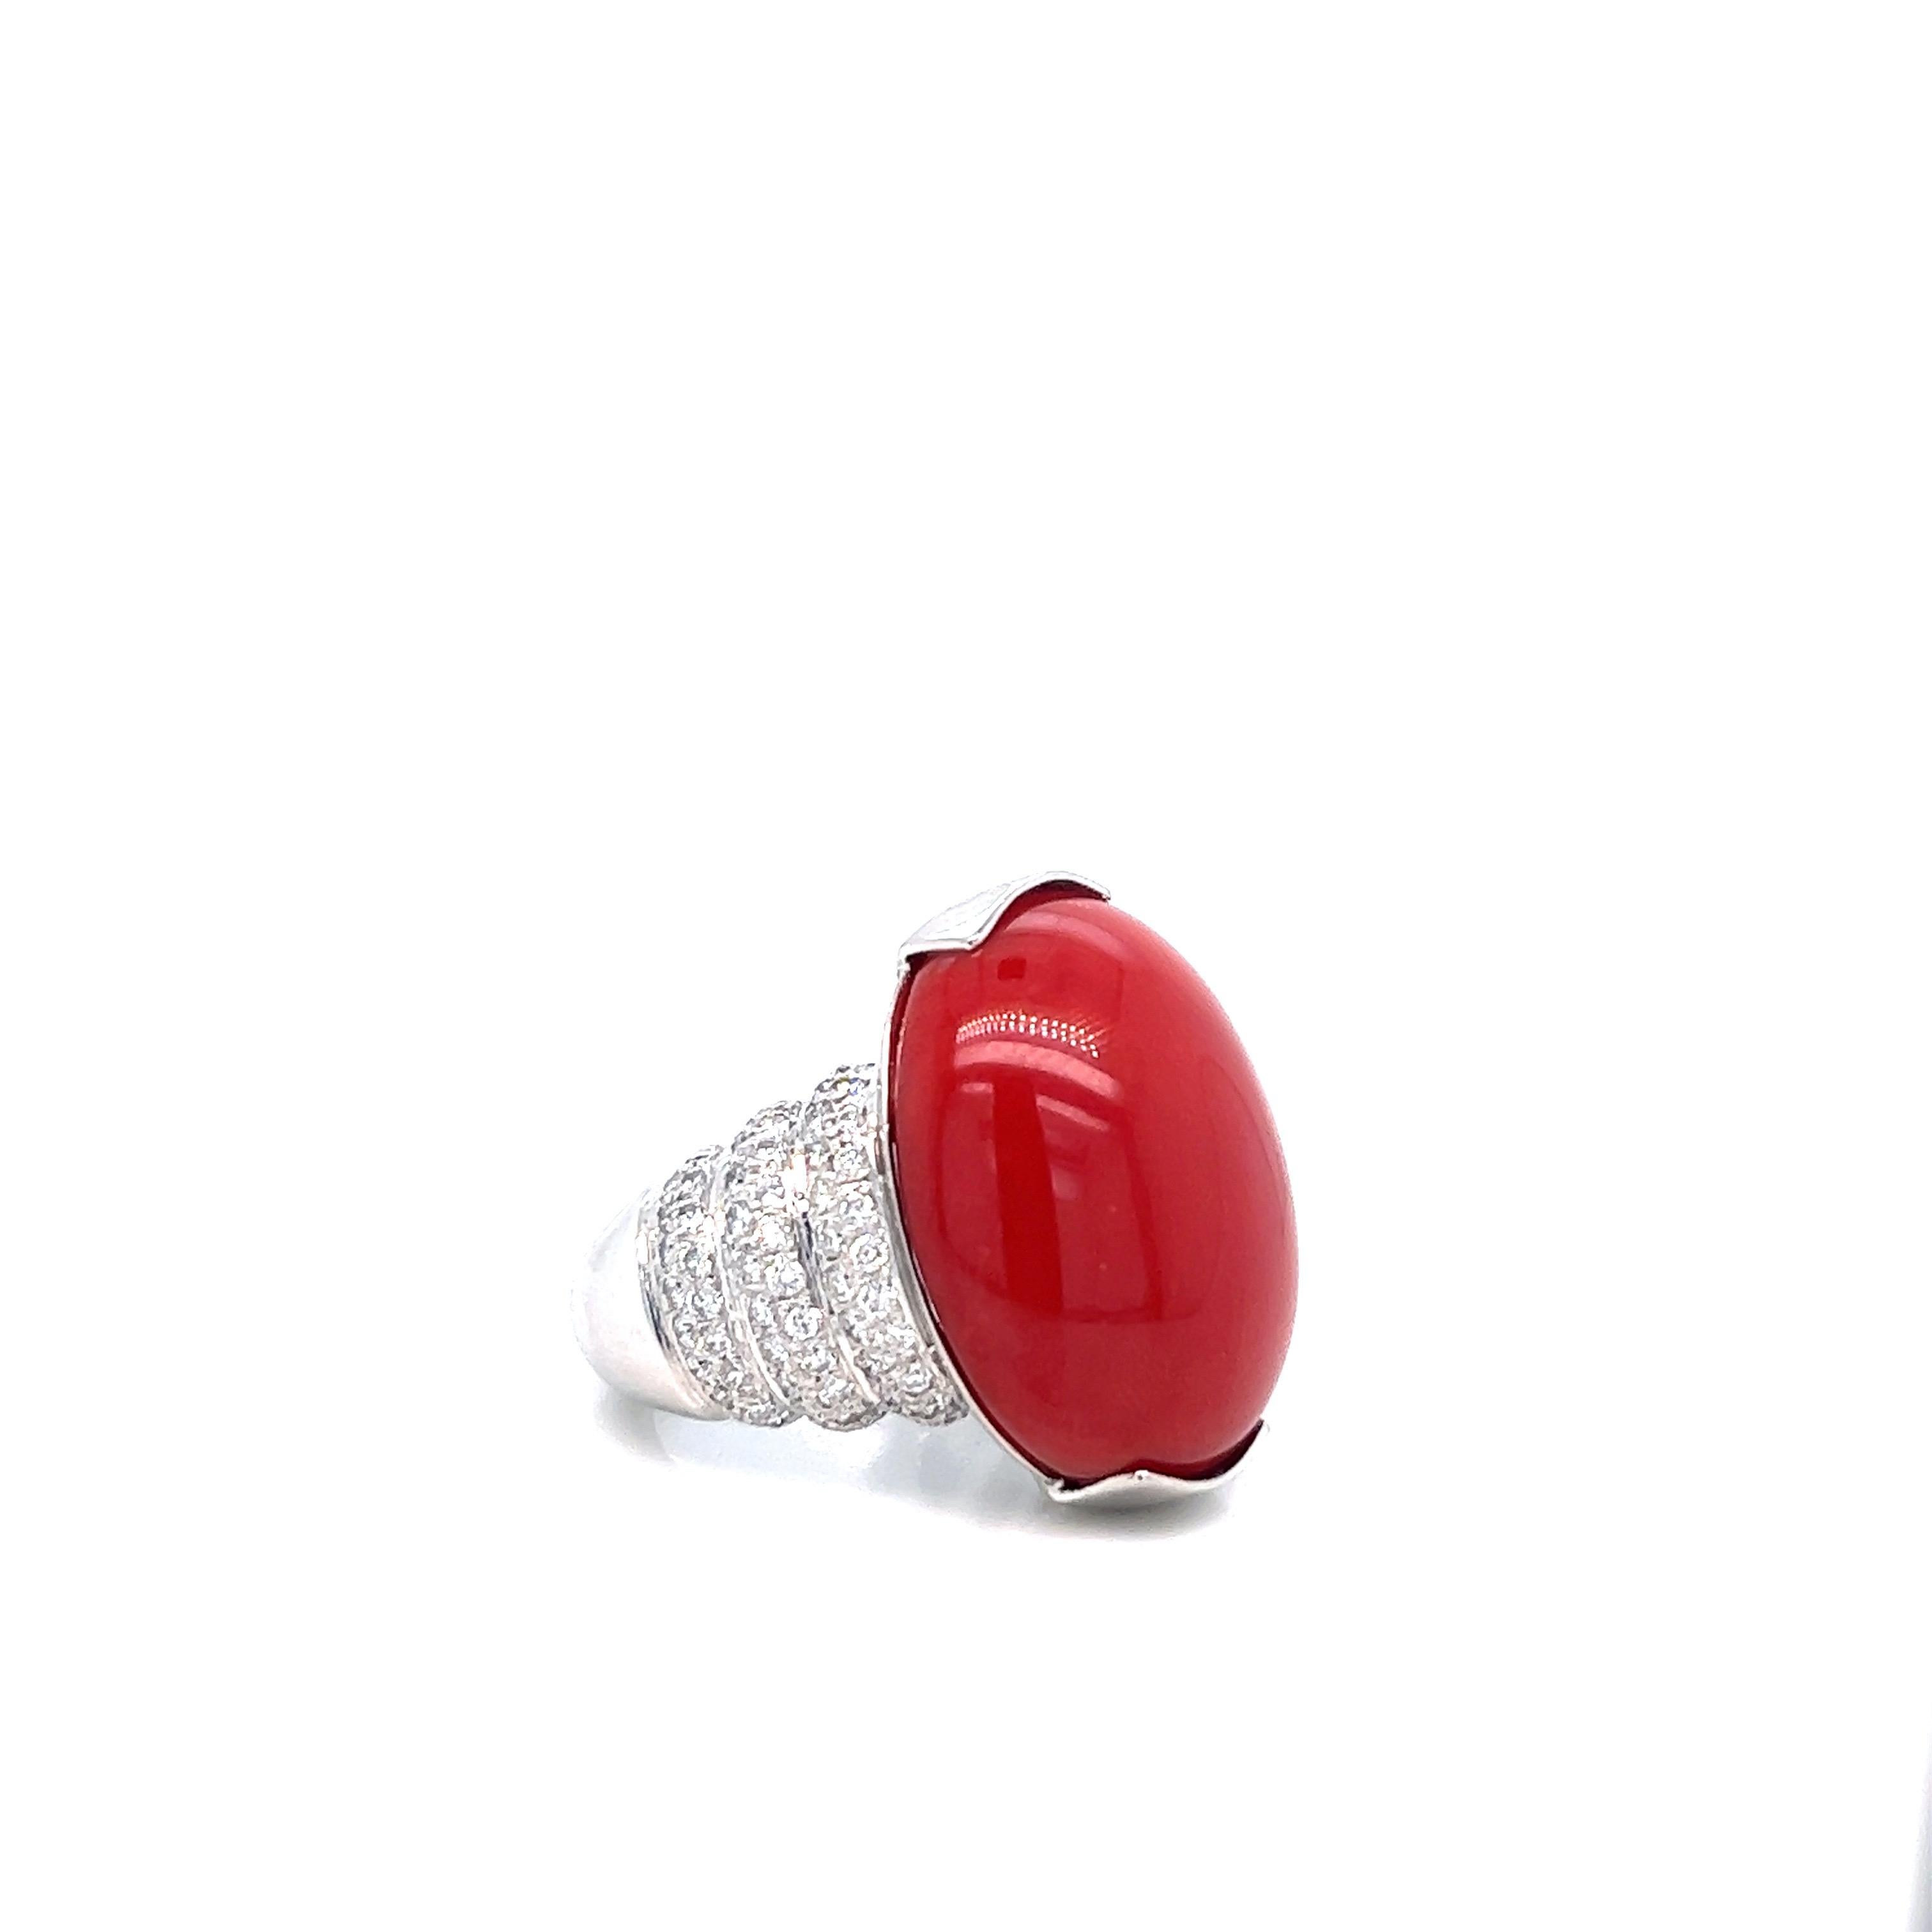 A classic cocktail ring featuring a cabochon ox blood-colored coral at its center. Surrounding the coral are round diamonds weighing approximately 1.5 carat. Coral's measurements: 23.8 mm x 19.3 mm. Marked: Pt 900 / D 1.50. Total weight: 28.5 grams.